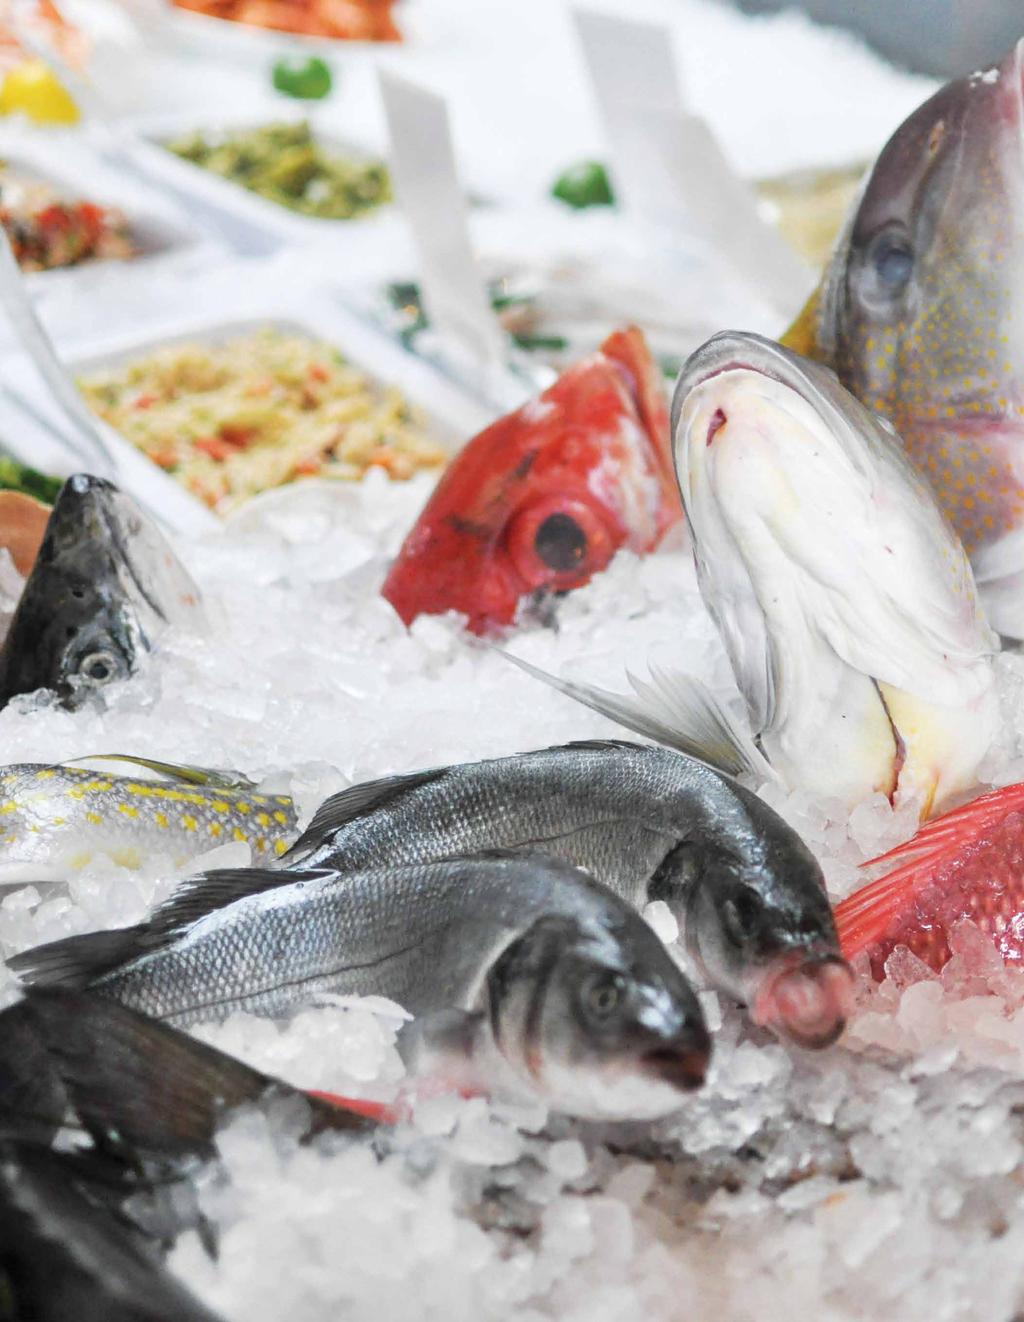 FULL BOAT-TO-PLATE TRACEABILITY, PAIRED WITH COMPREHENSIVE LABELLING, CAN HELP OUR OCEANS, OUR